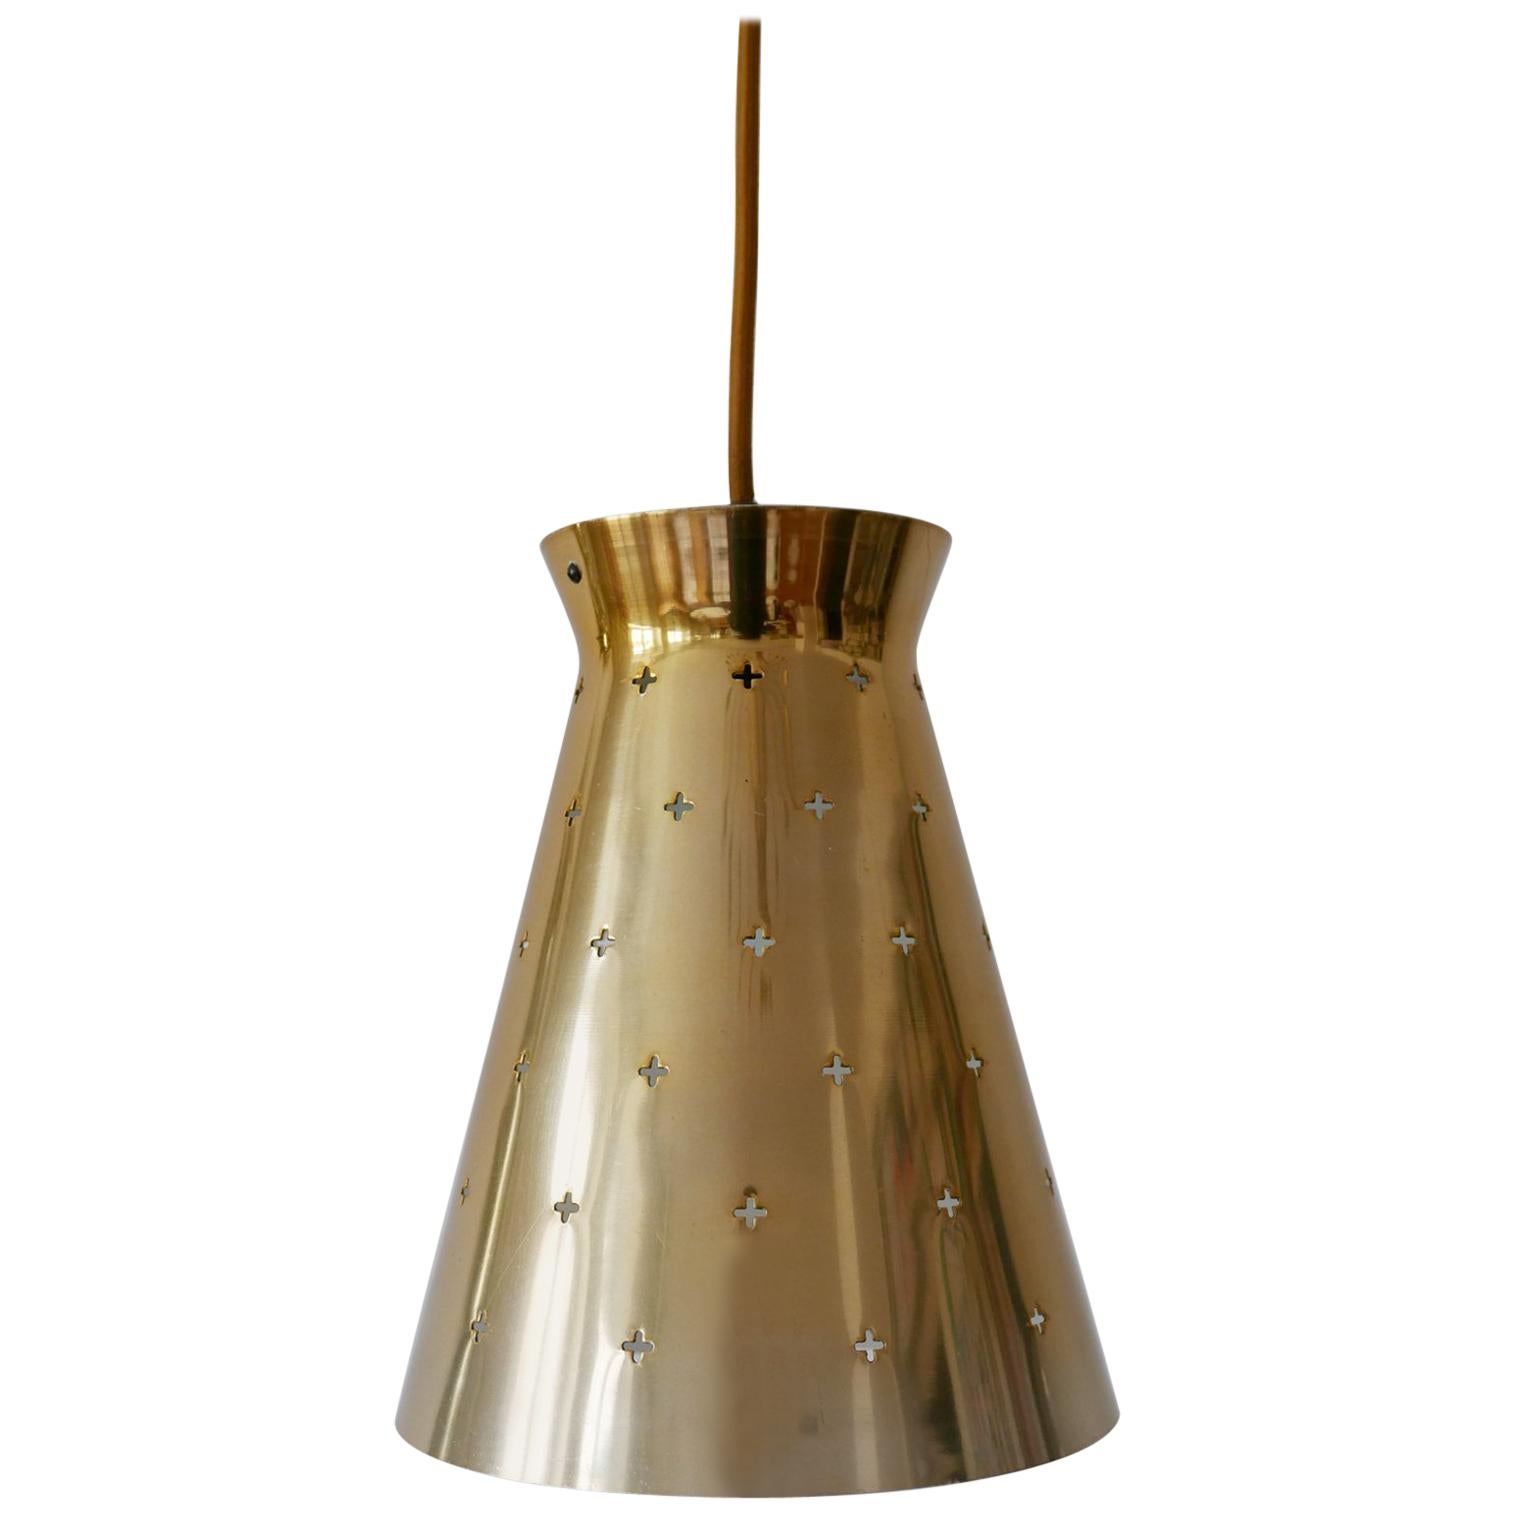 Lovely Mid-Century Modern Diabolo Pendant Lamp by Hillebrand, 1950s, Germany For Sale